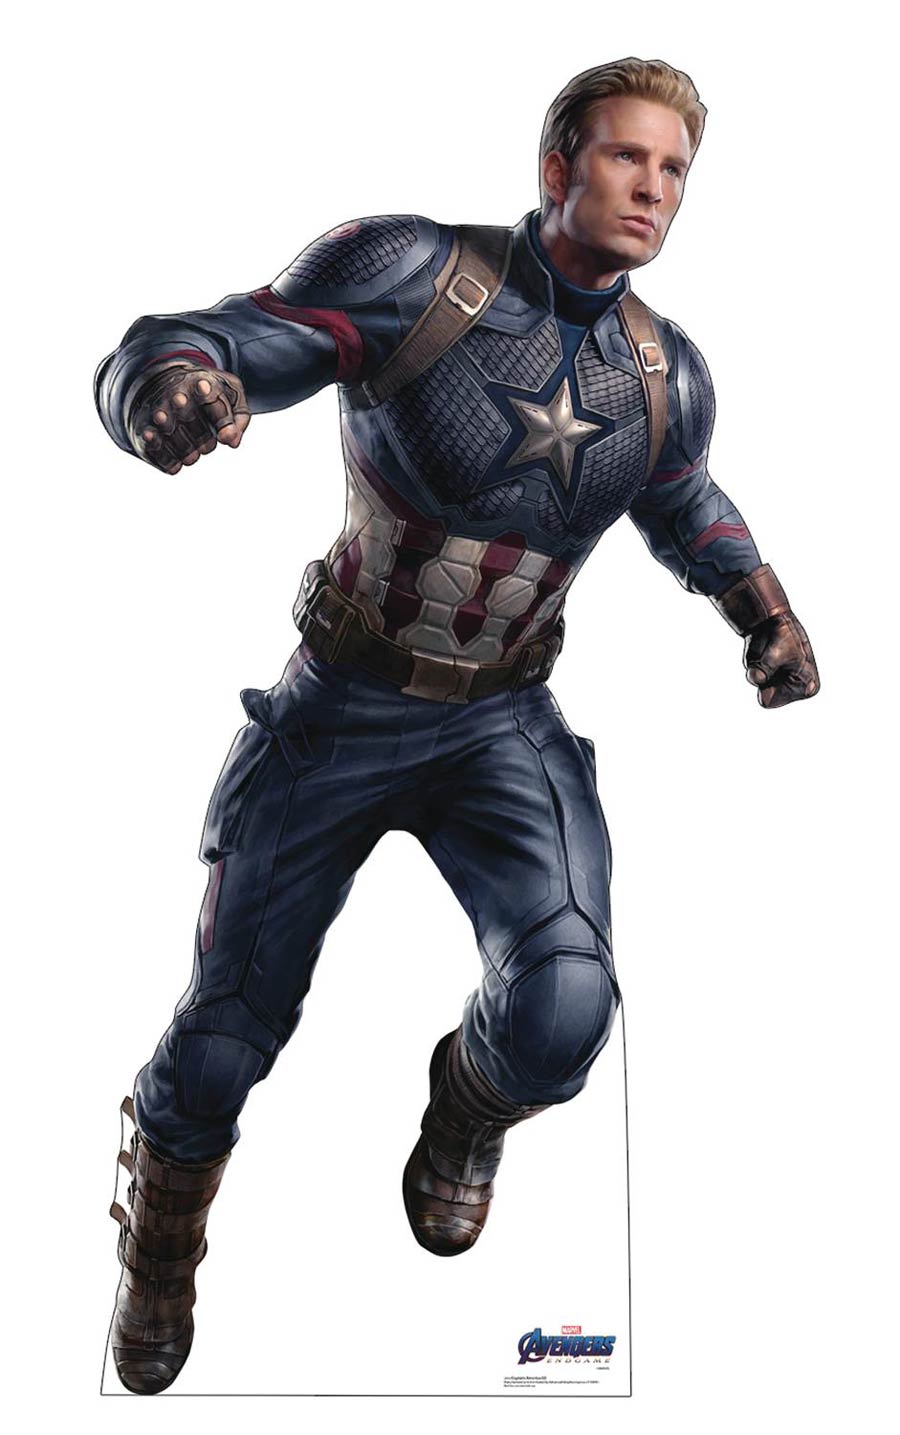 Avengers Endgame Life-Size Stand-Up - Captain America